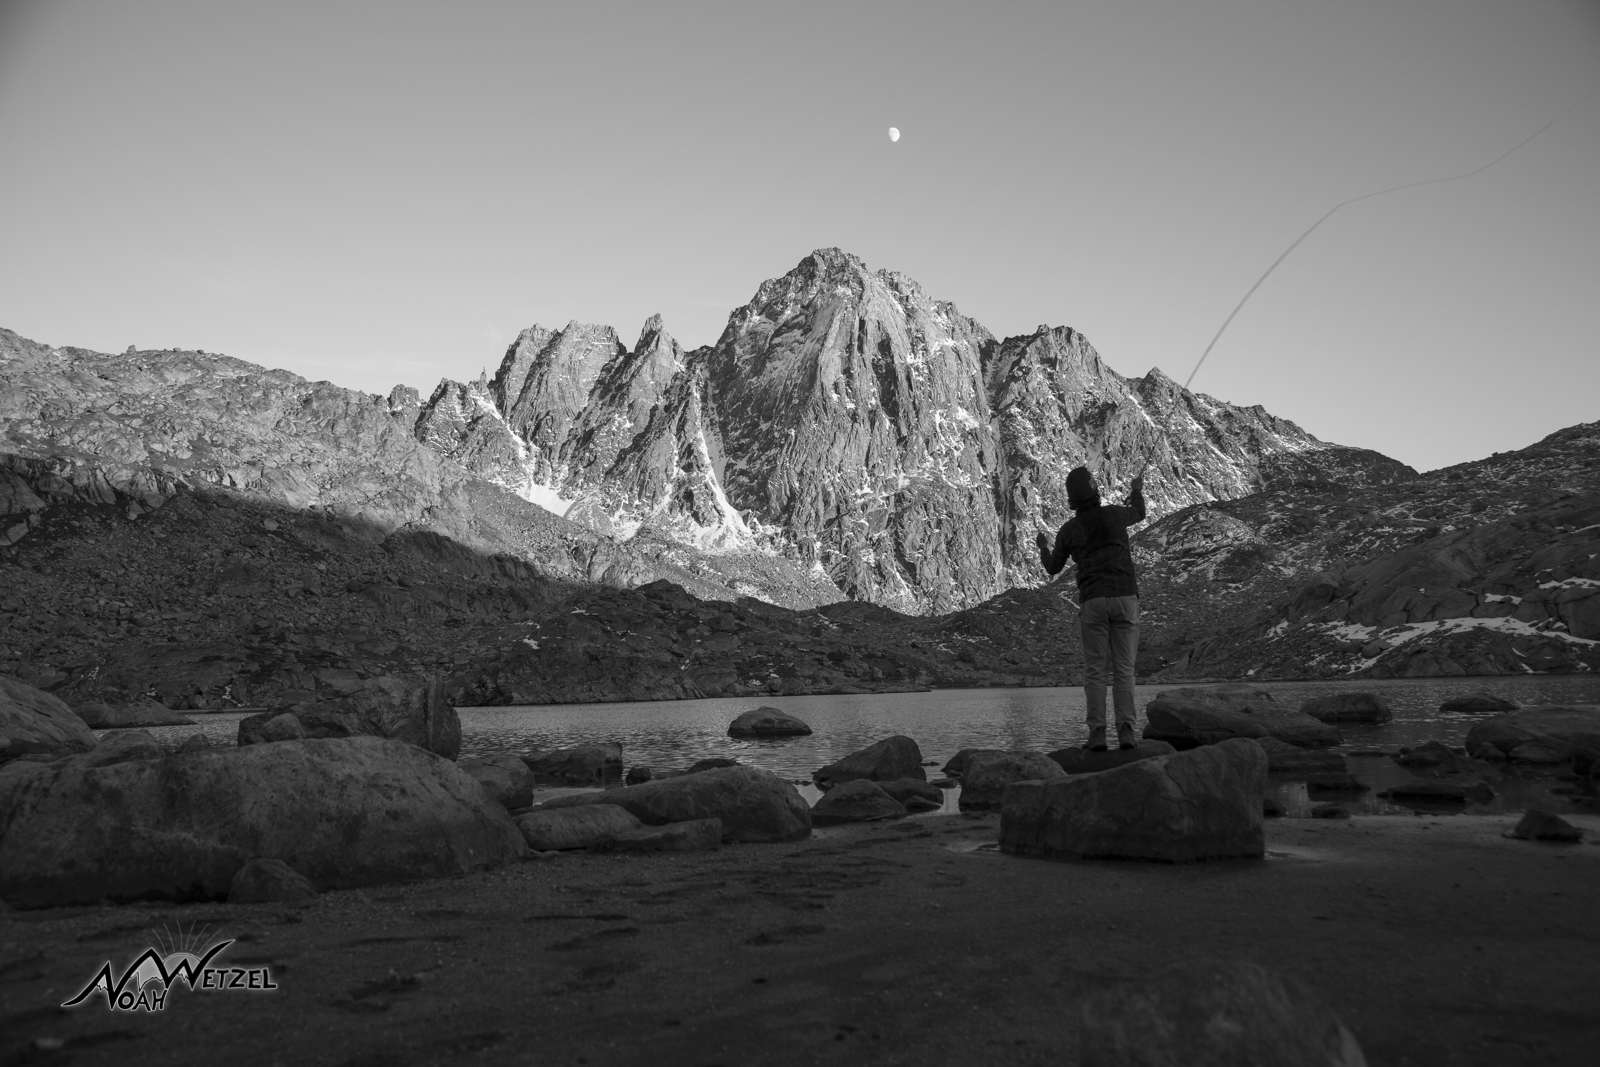 Self Portrait. Fly fishing...hoping for signs of life. Wind River Range. Wyoming